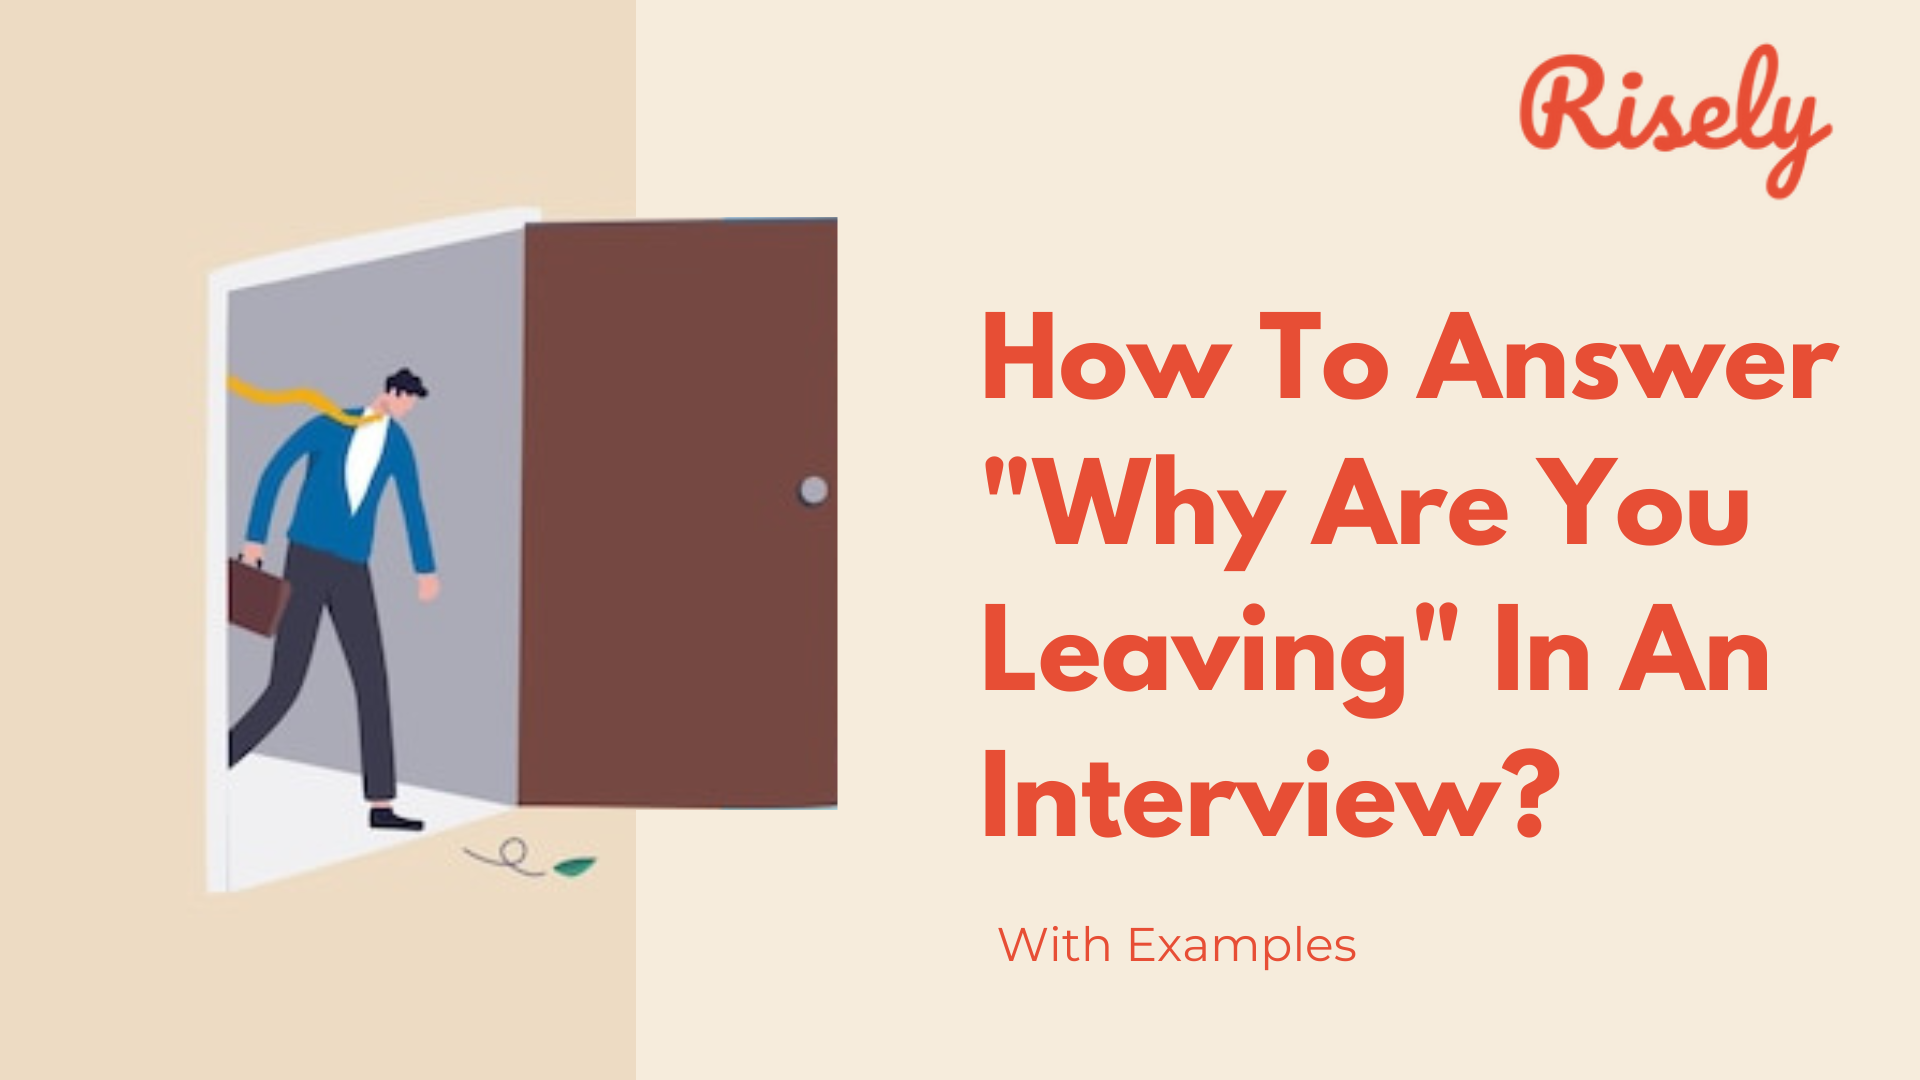 How To Answer “Why Are You Leaving” In An Interview? With Examples